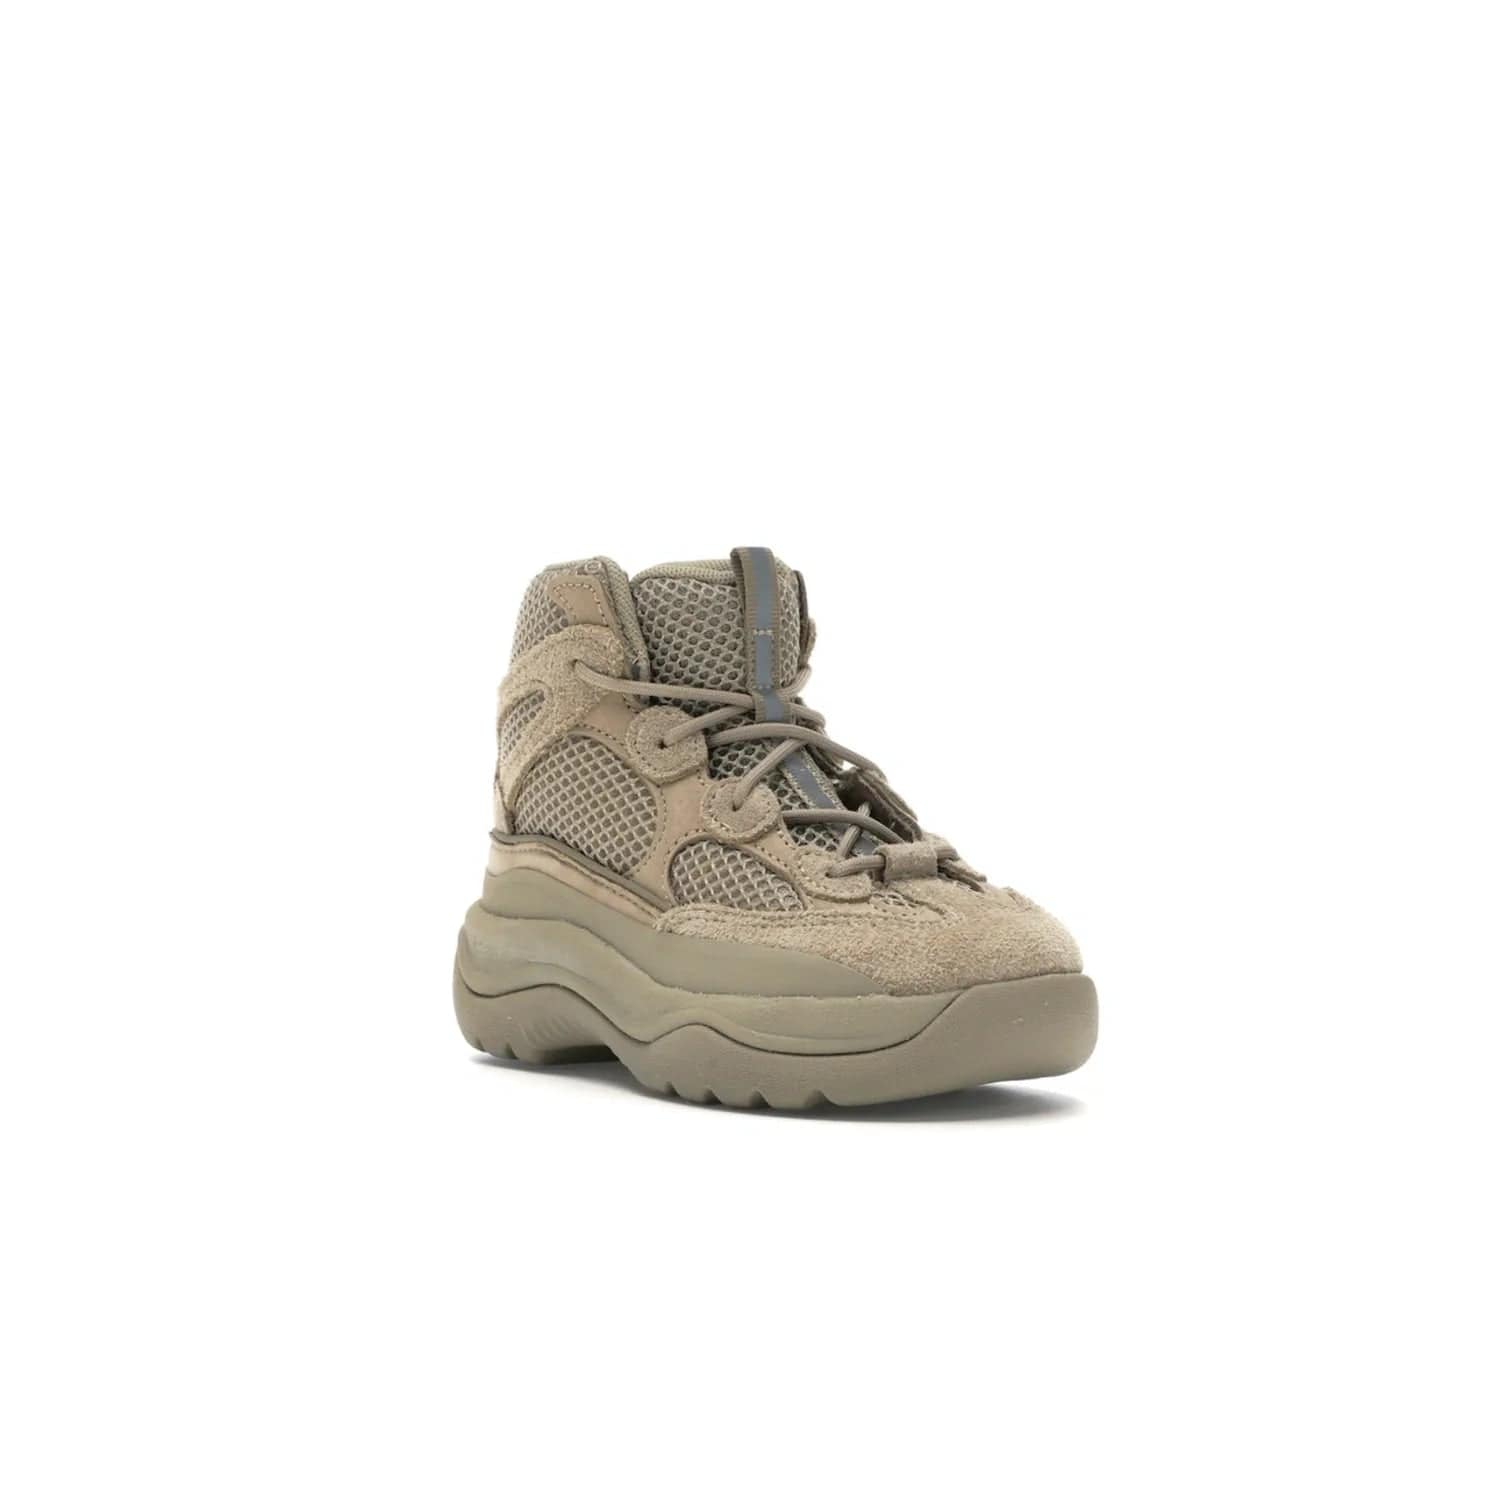 adidas Yeezy Desert Boot Rock (Kids) - Image 6 - Only at www.BallersClubKickz.com - Elevate your style this season with the adidas Yeezy Desert Boot Rock. Crafted from layered nylon and suede, this chic kids' silhouette features an EVA midsole and rubber outsole for superior cushioning and traction.